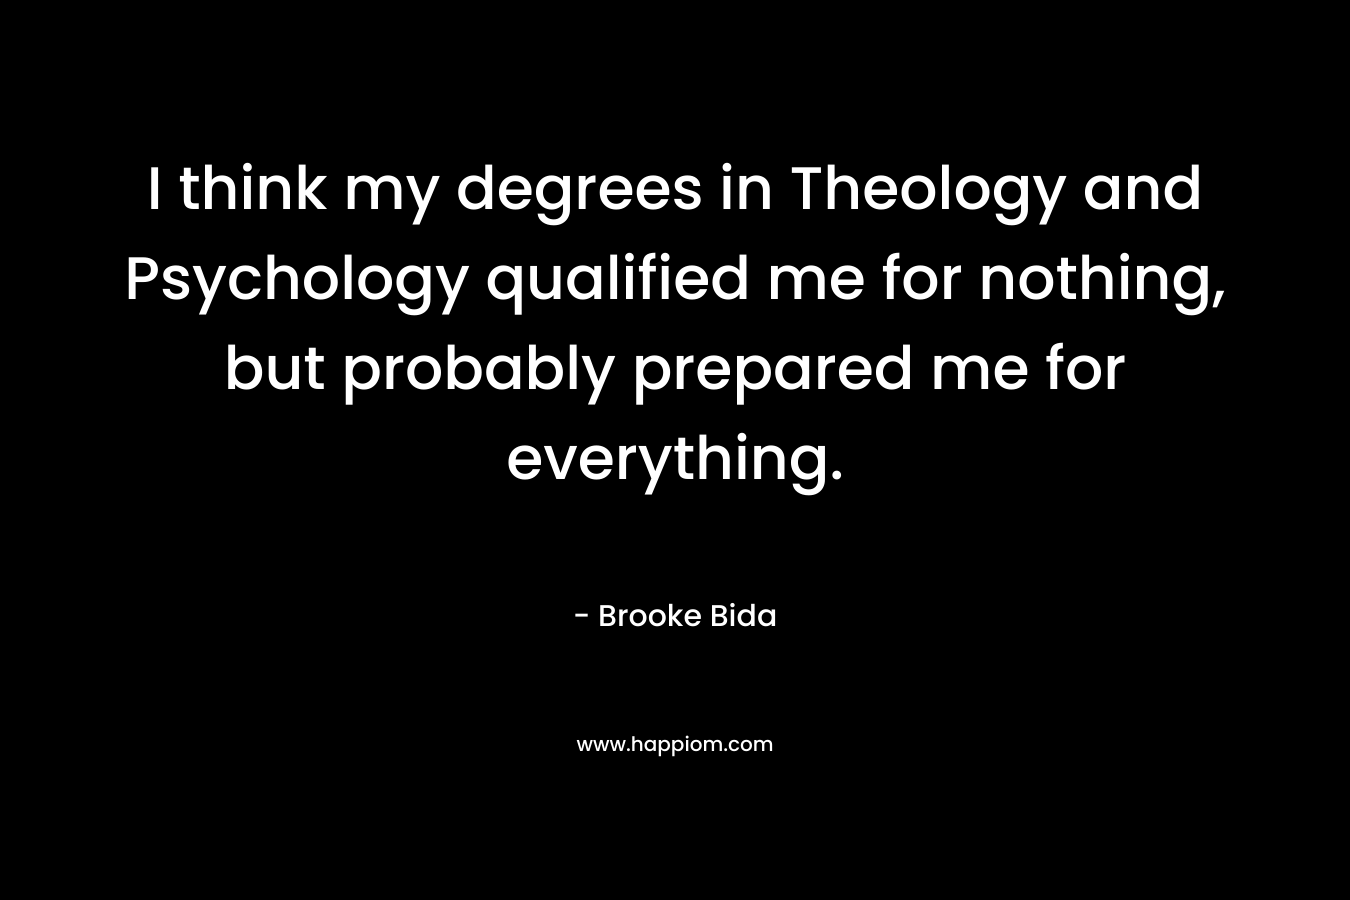 I think my degrees in Theology and Psychology qualified me for nothing, but probably prepared me for everything. – Brooke Bida